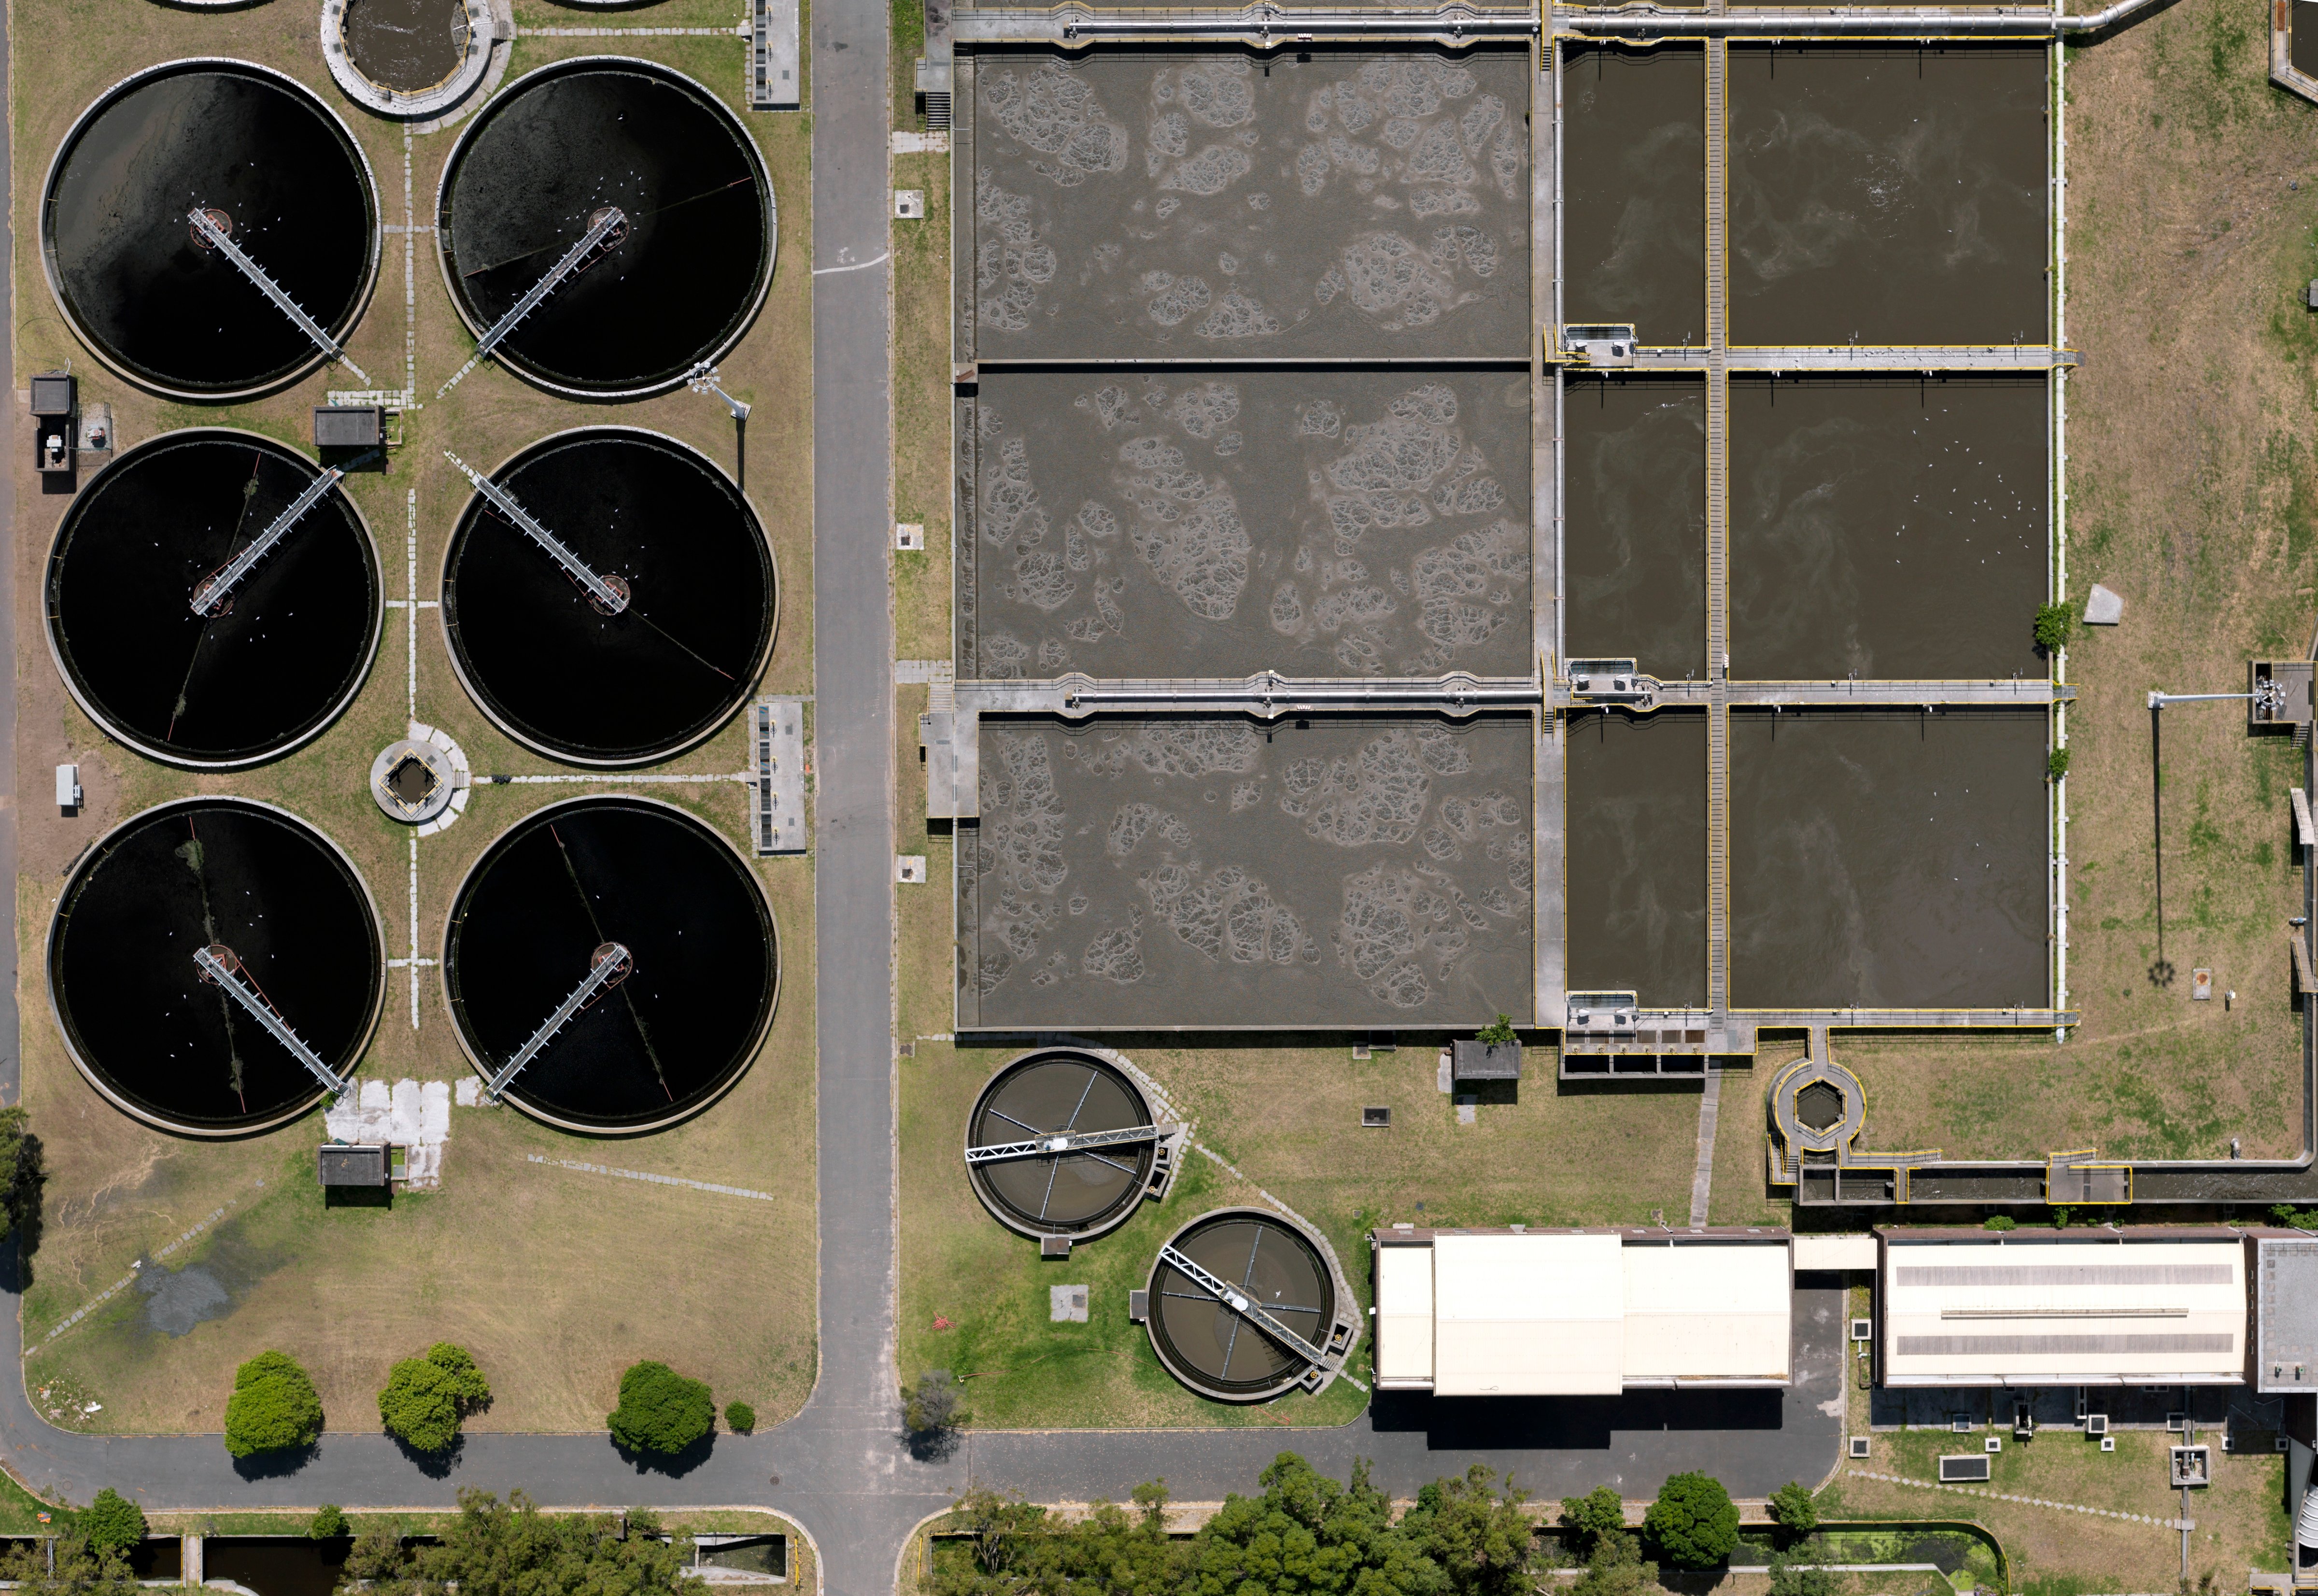 INFRASTRUCTURE WASTE WATER TREATMENT PLANT